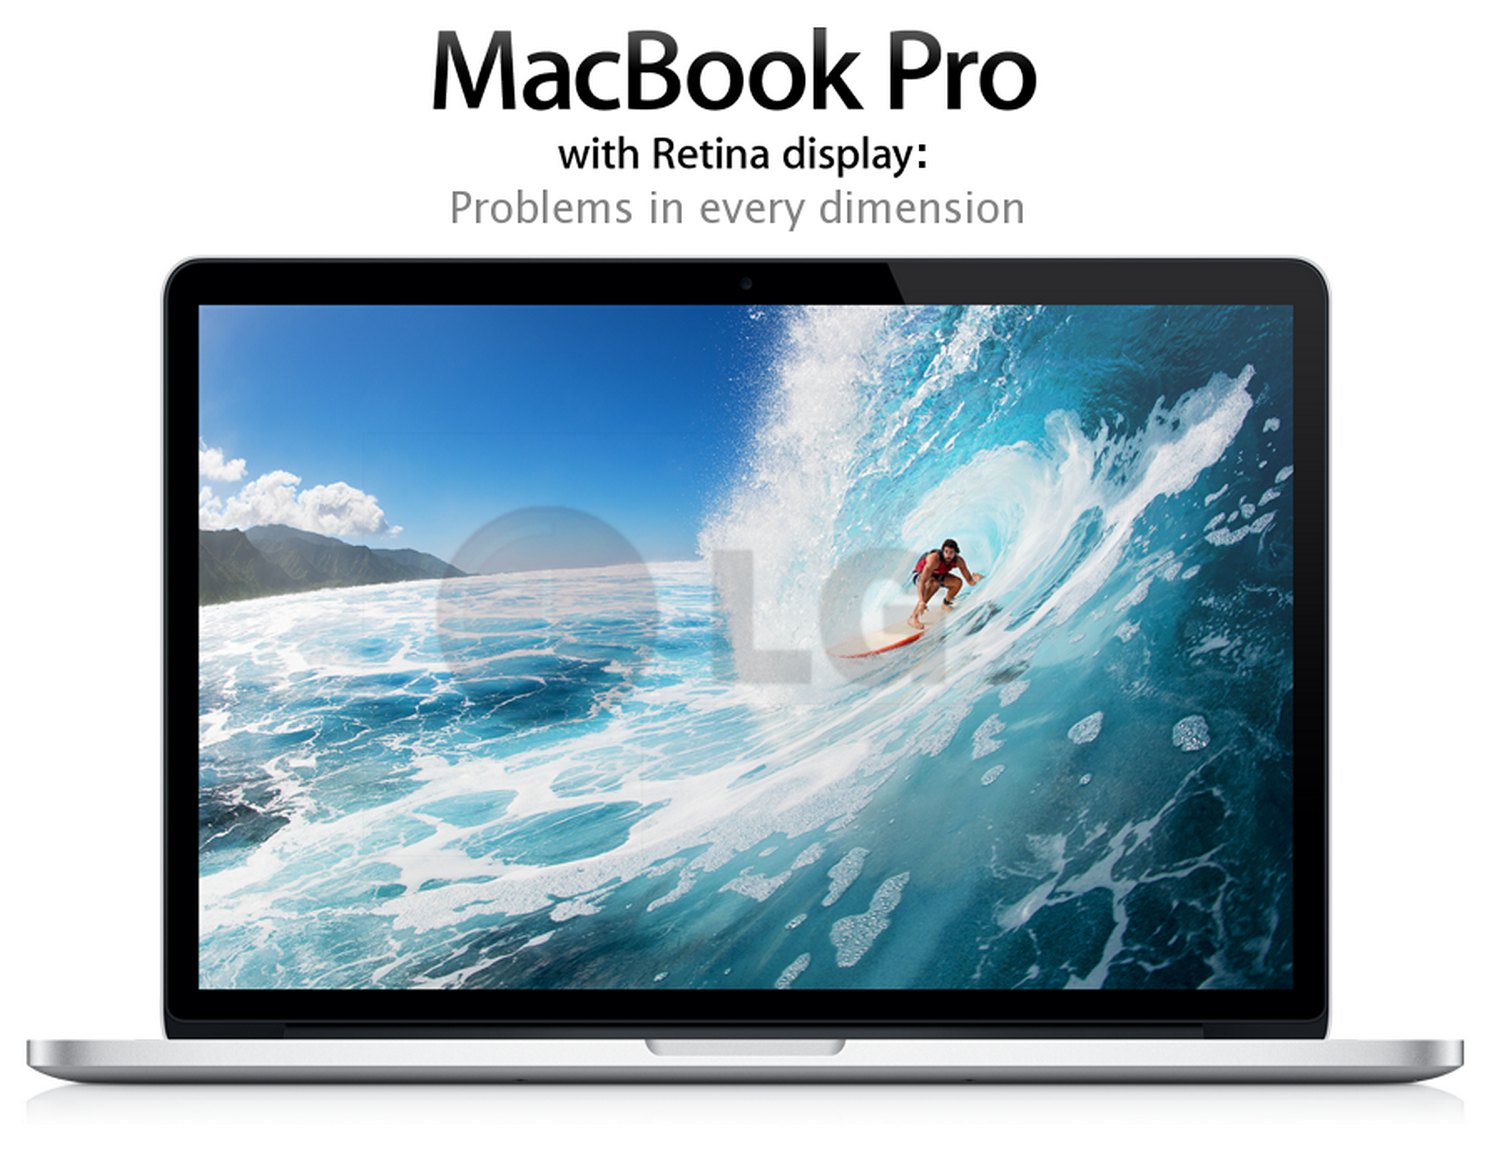 MacBook Pro with Retina display Problems in every dimension 9to5Mac